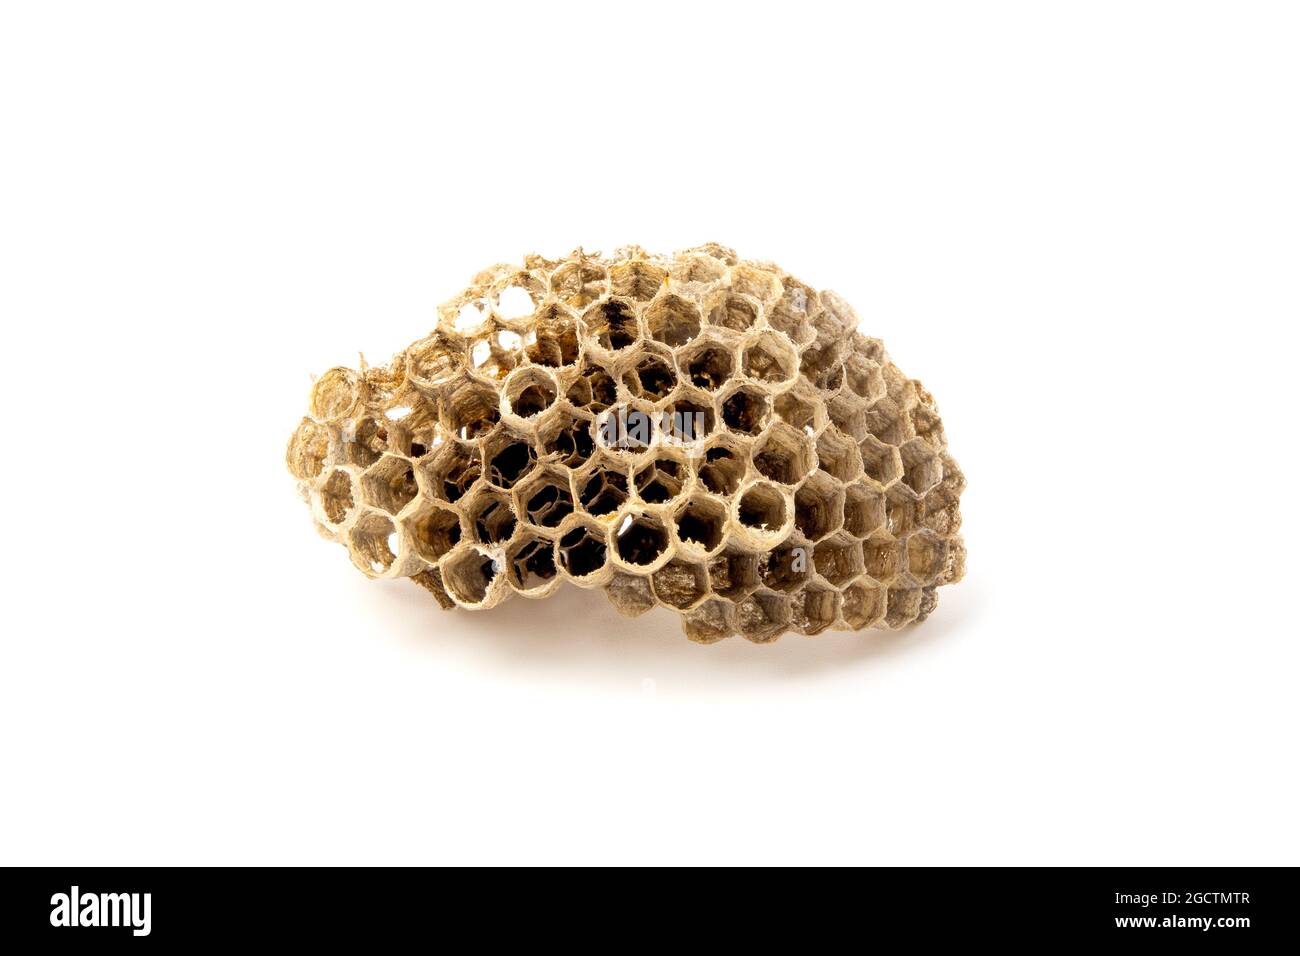 Section of a paper wasp nest on a white background Stock Photo